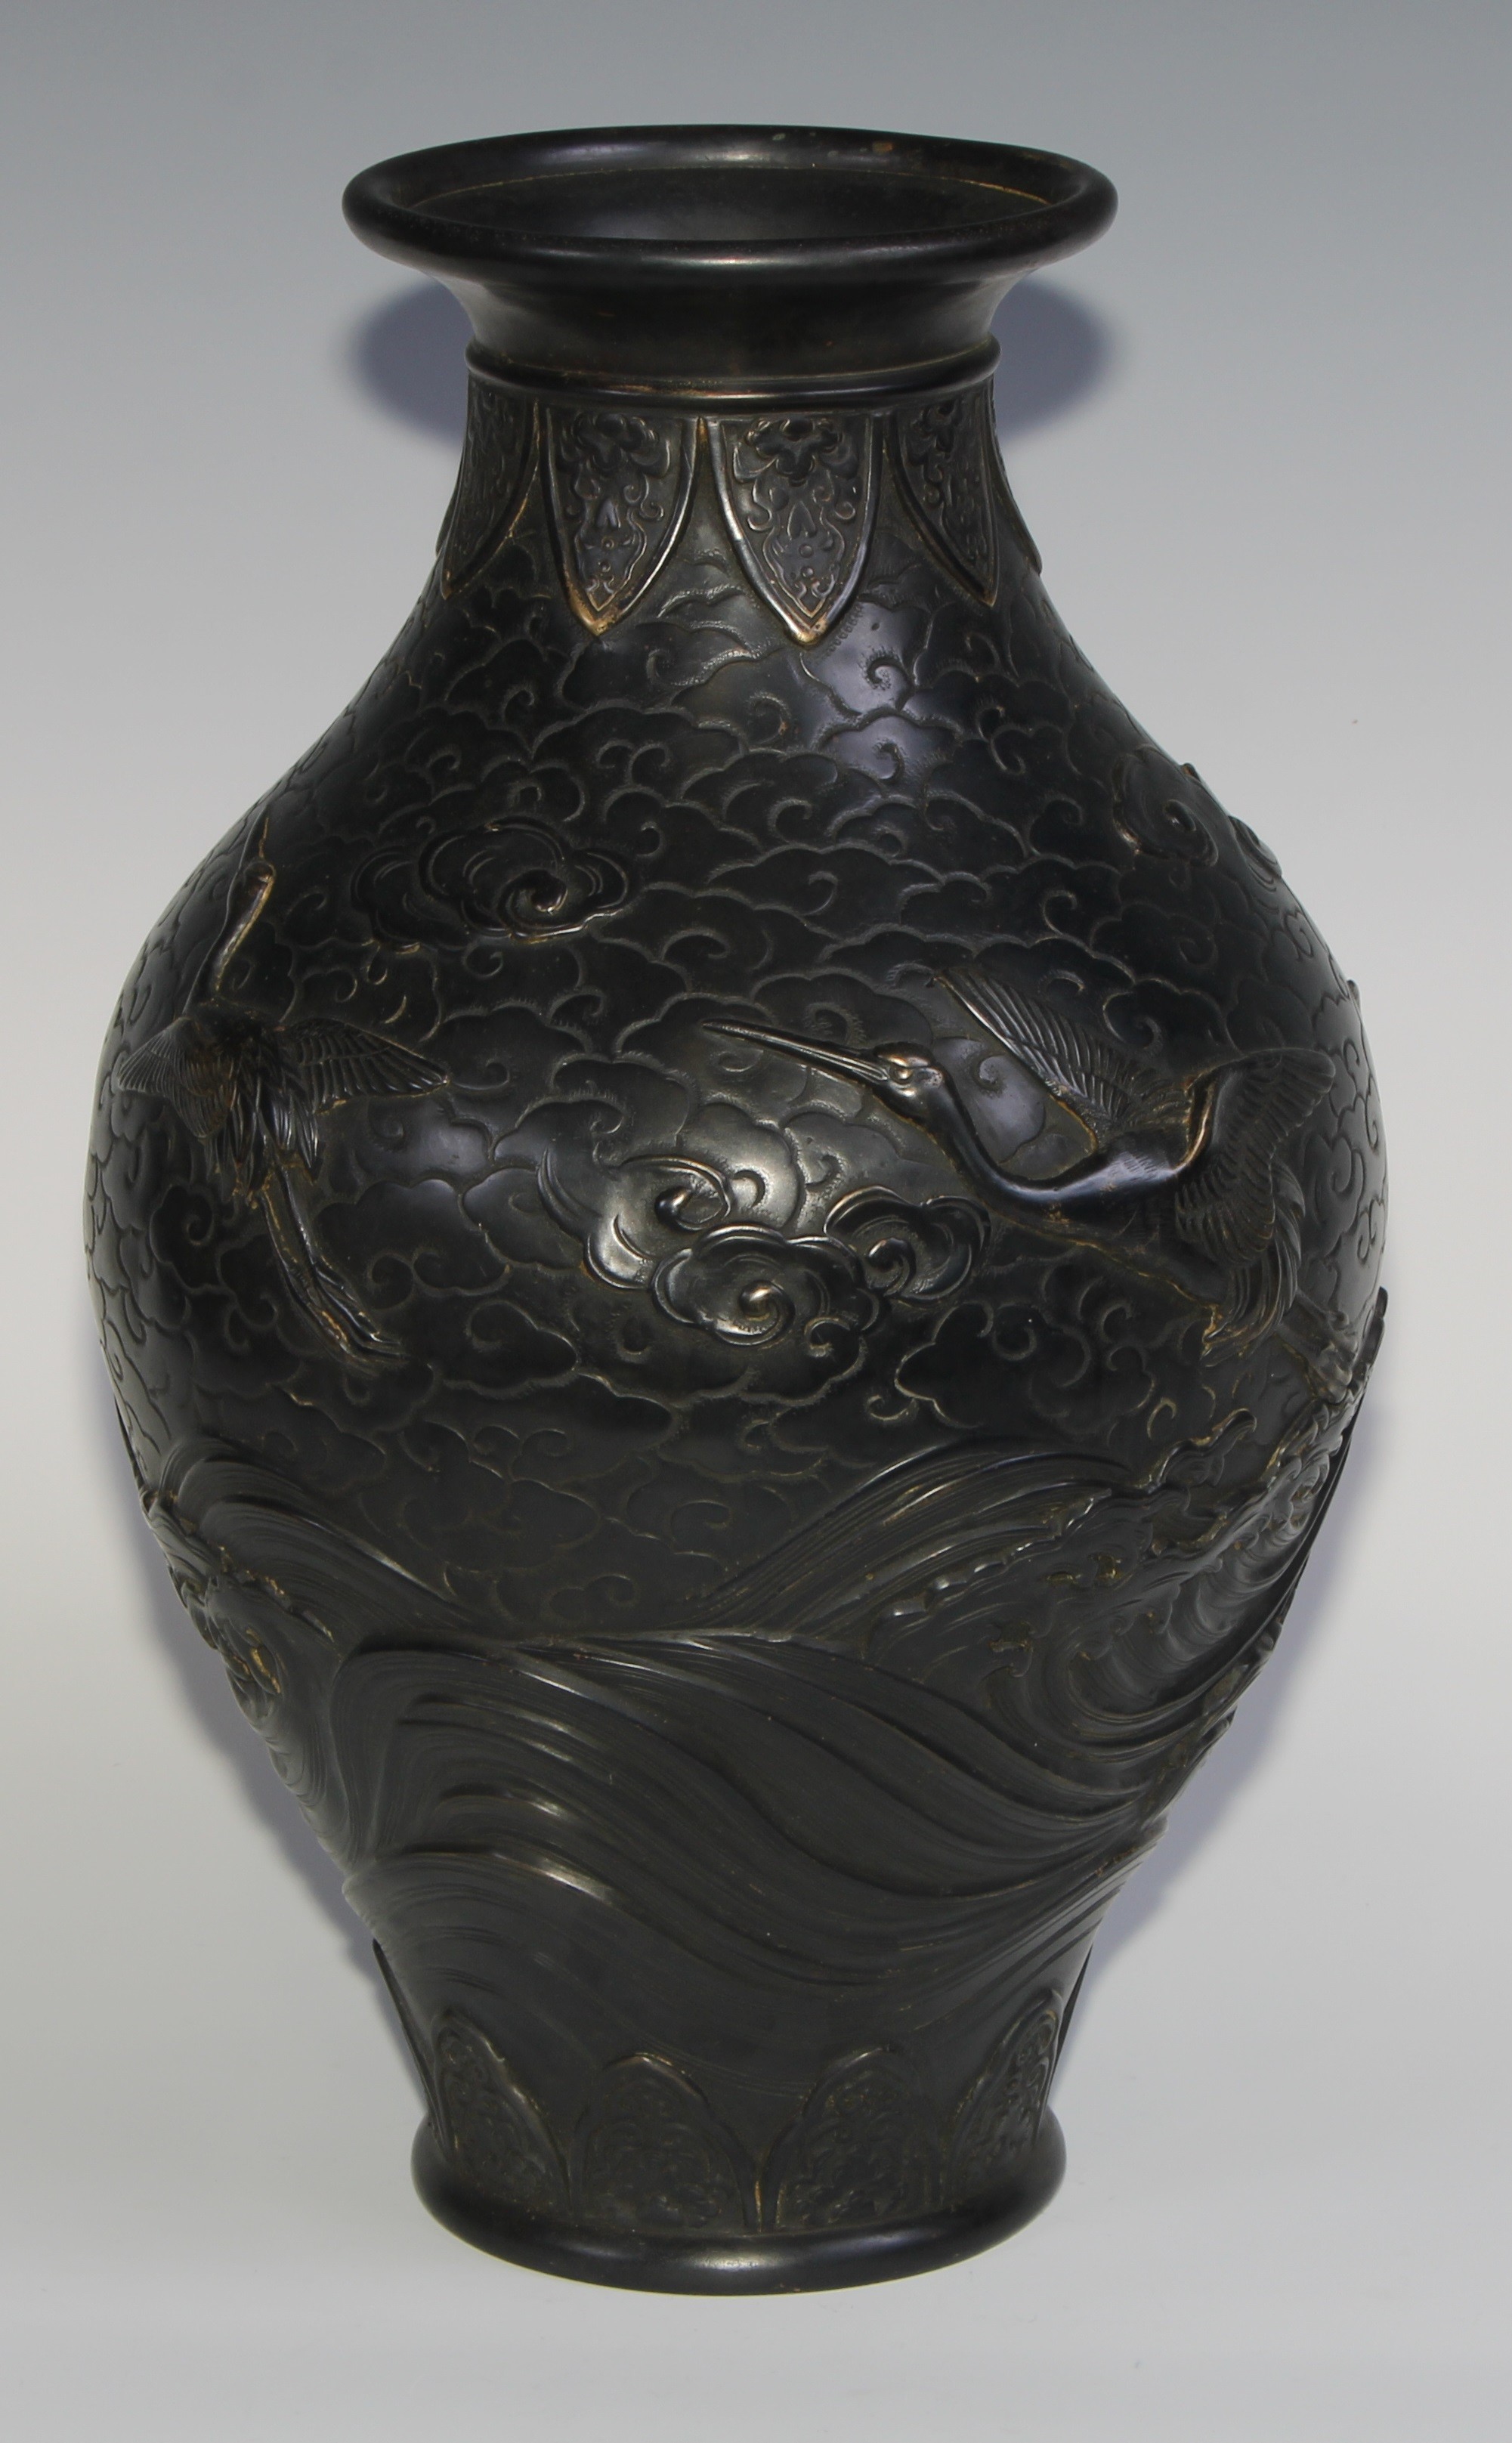 A Japanese dark patinated bronze ovoid vase, cast in relief with cranes taking flight amongst - Image 5 of 7